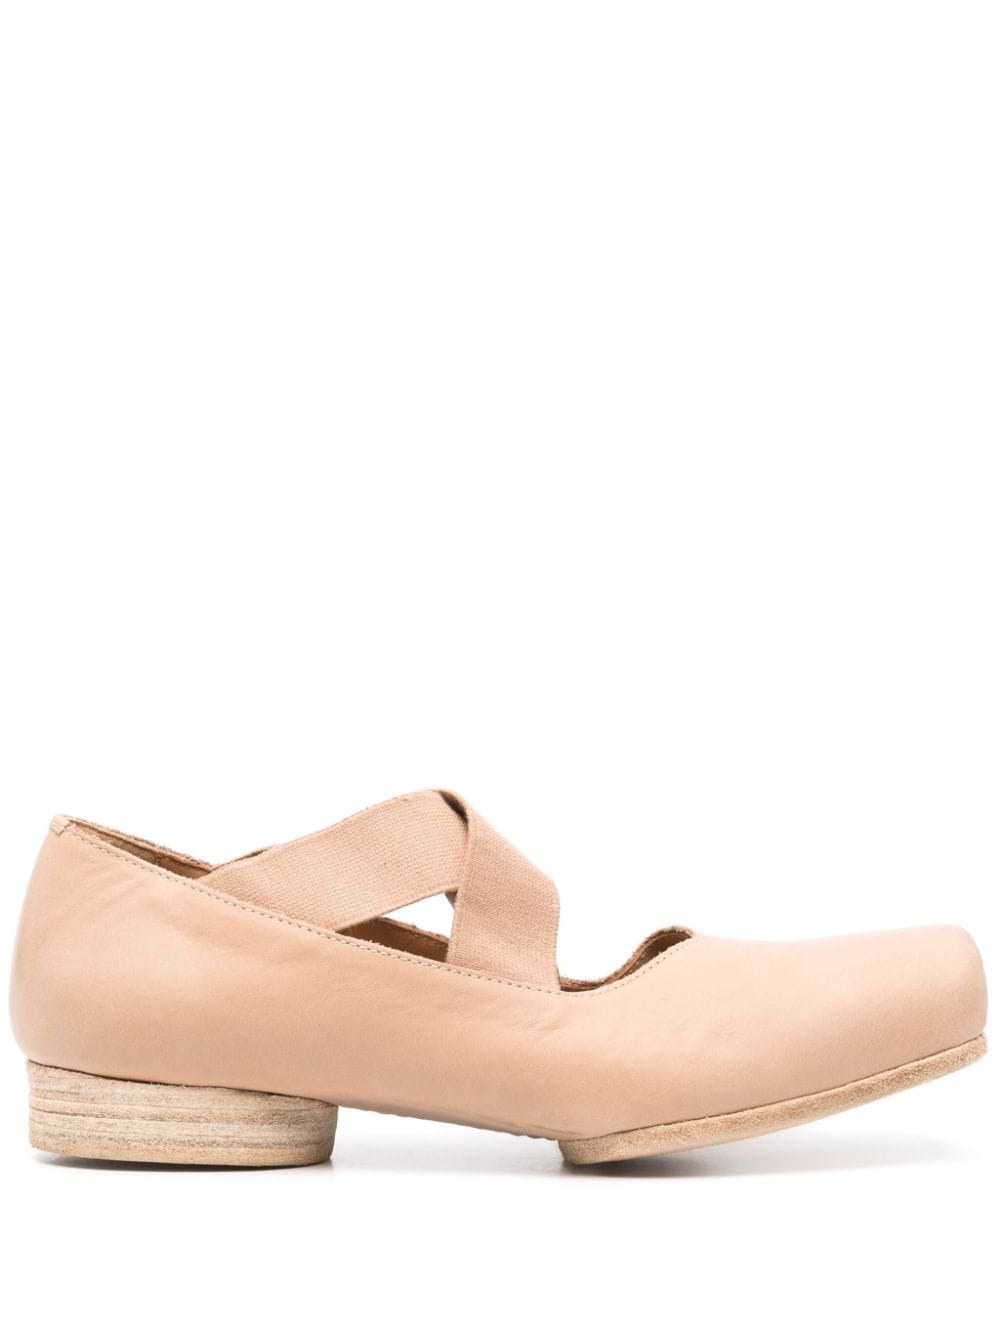 Uma Wang Square-toe Leather Ballerina Shoes In Neutrals